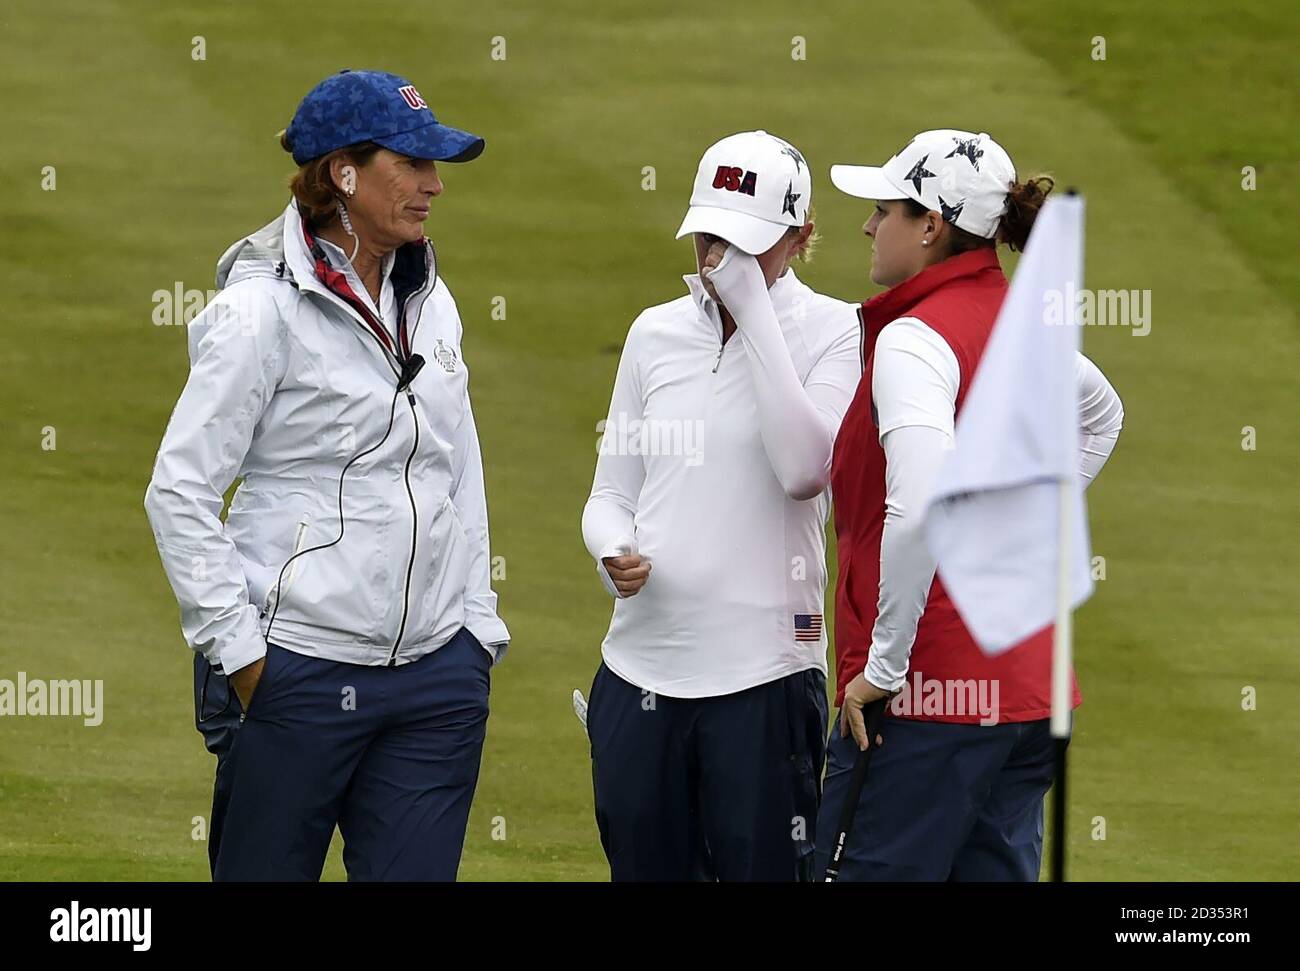 Team USA's Stacy Lewis (centre) appears emotional alongside Team USA  captain Juli Inkster (left) after playing a shot on the 14h during preview  day one of the 2019 Solheim Cup at Gleneagles